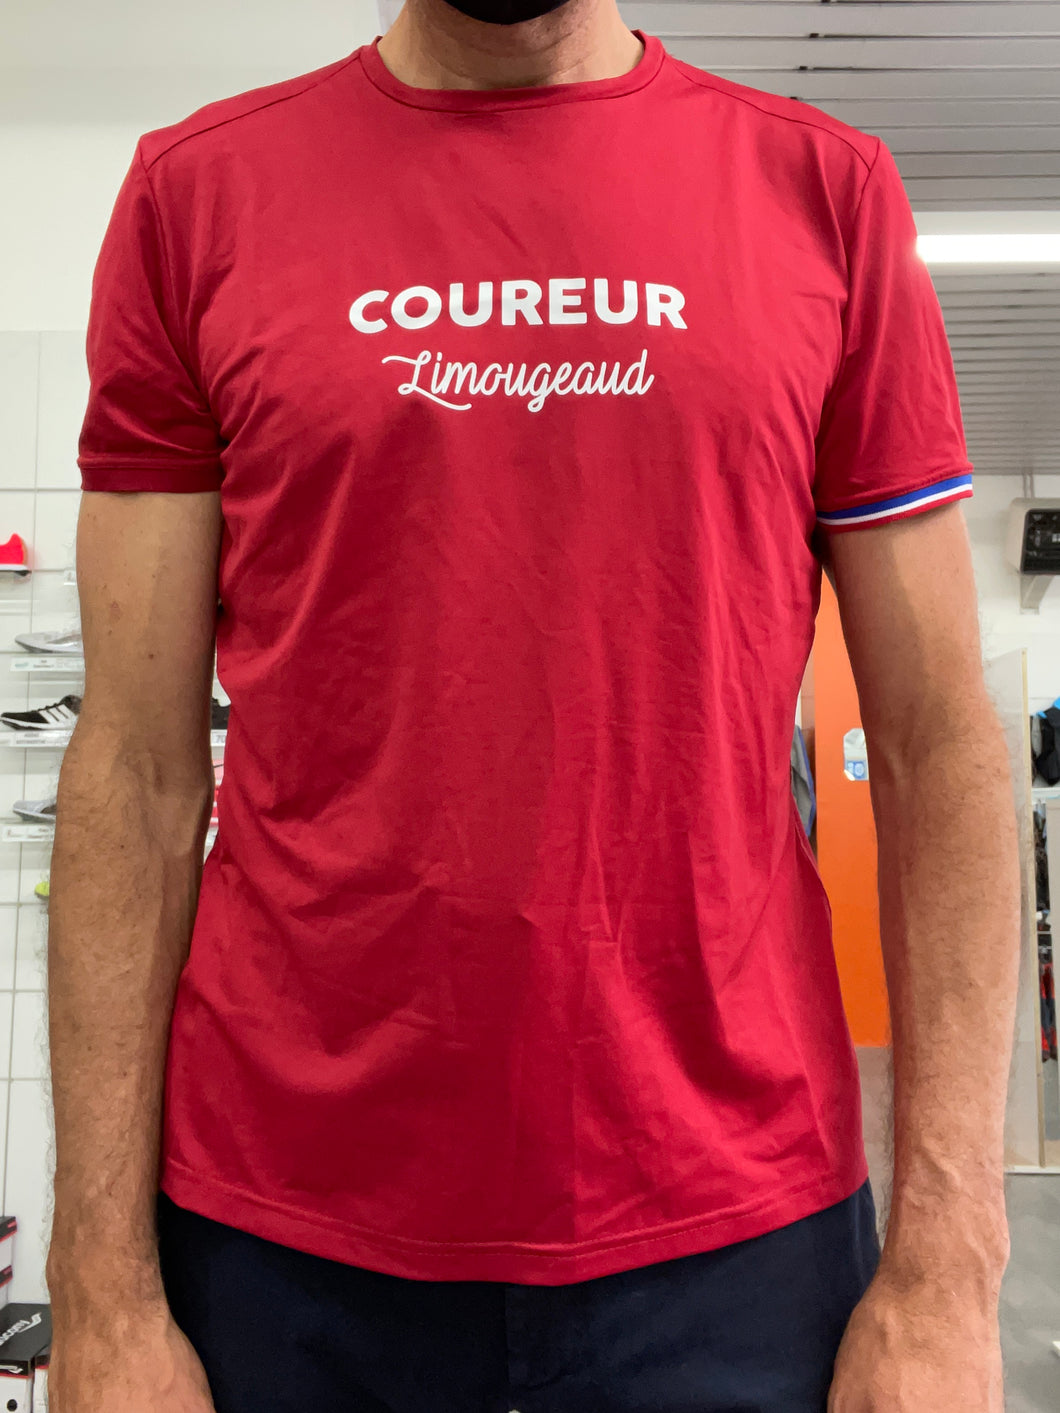 Tee Shirt Le COUREUR LIMOUGEAUD